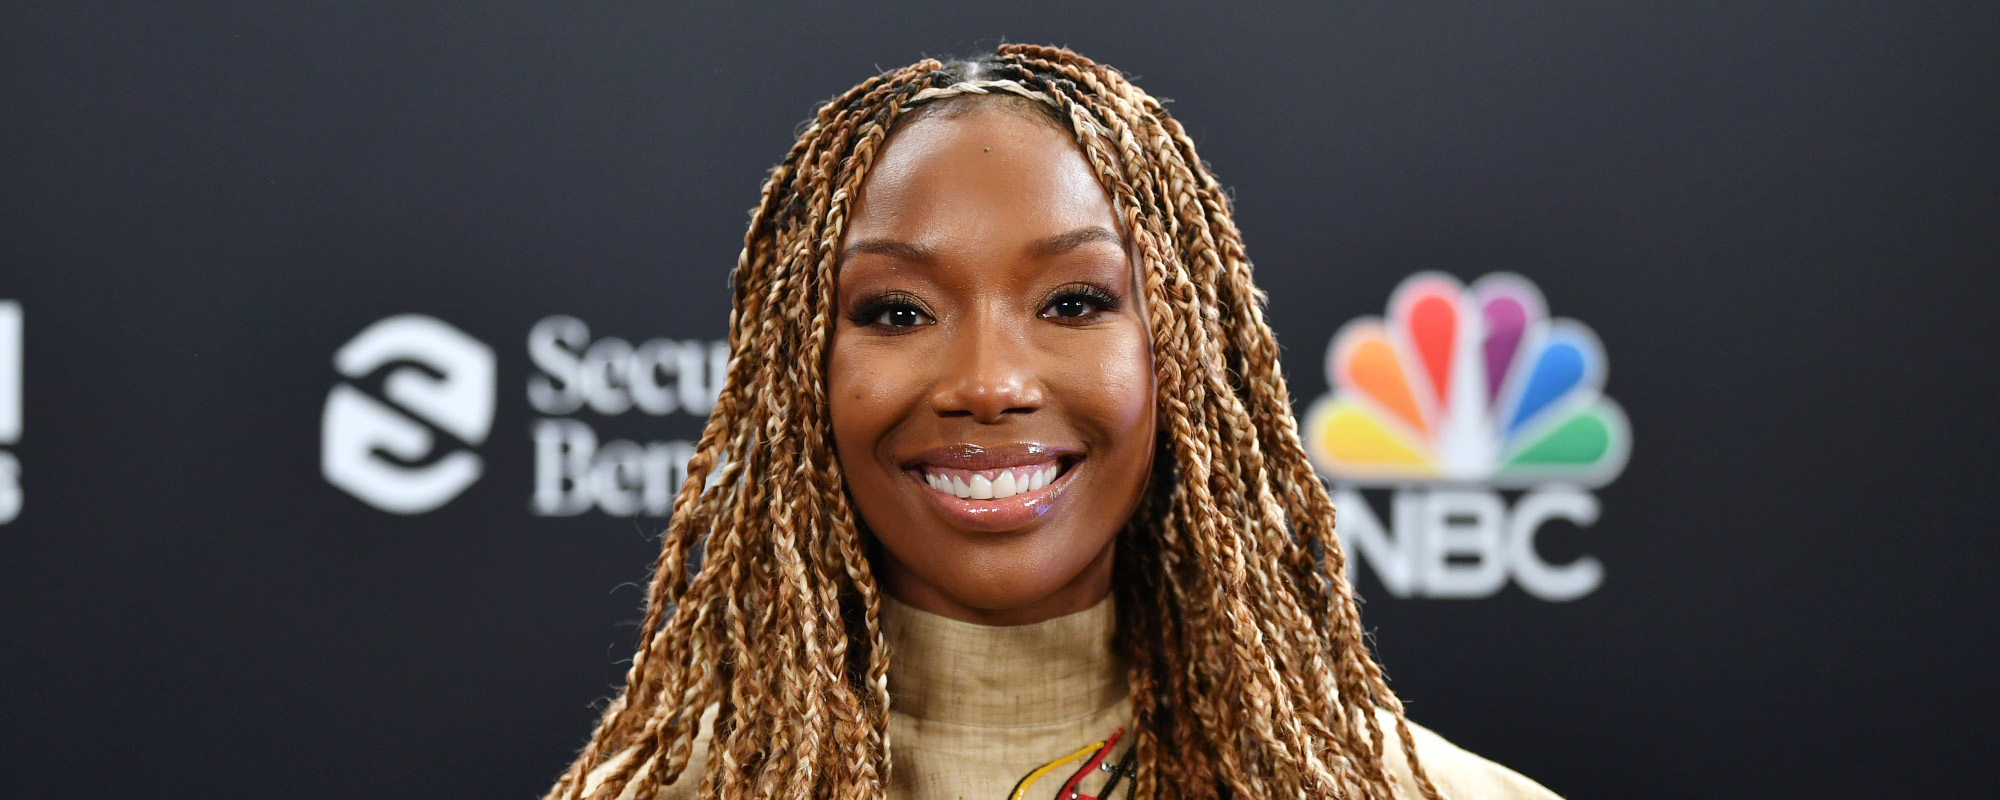 Update: Singer Brandy Addresses Hospitalization—“Thank You for Your Prayers and Support”